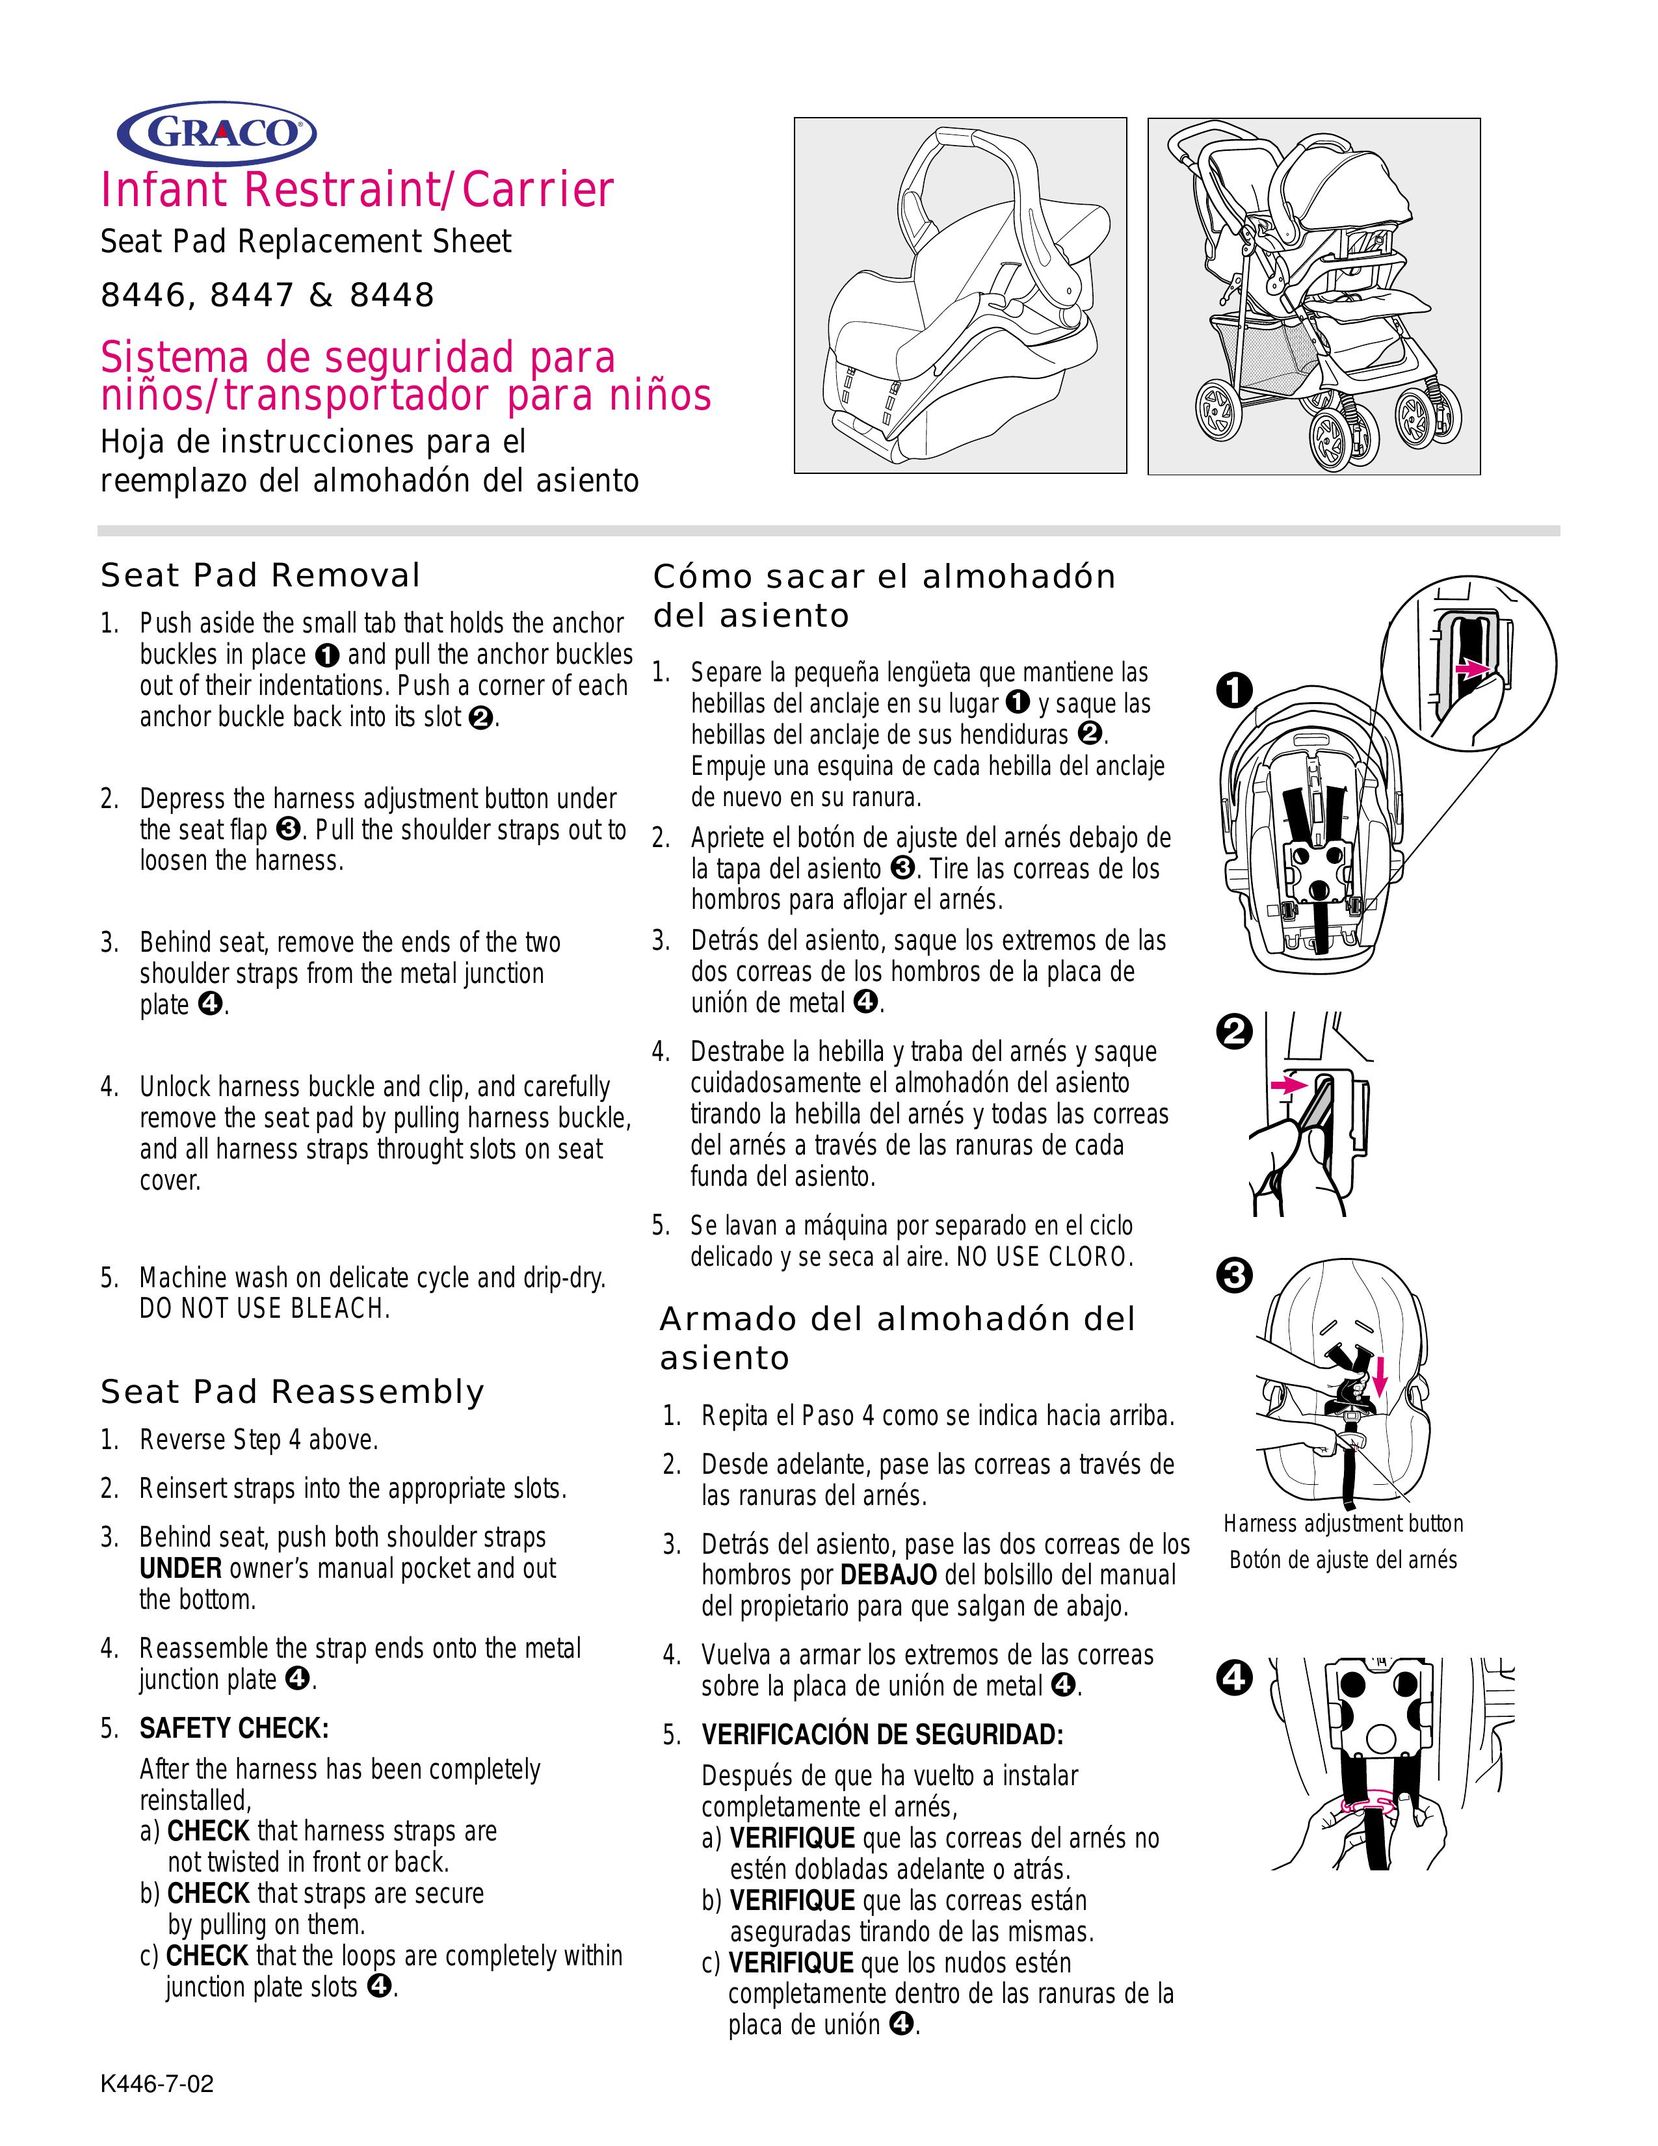 Graco 8446 Baby Carrier User Manual (Page 1)